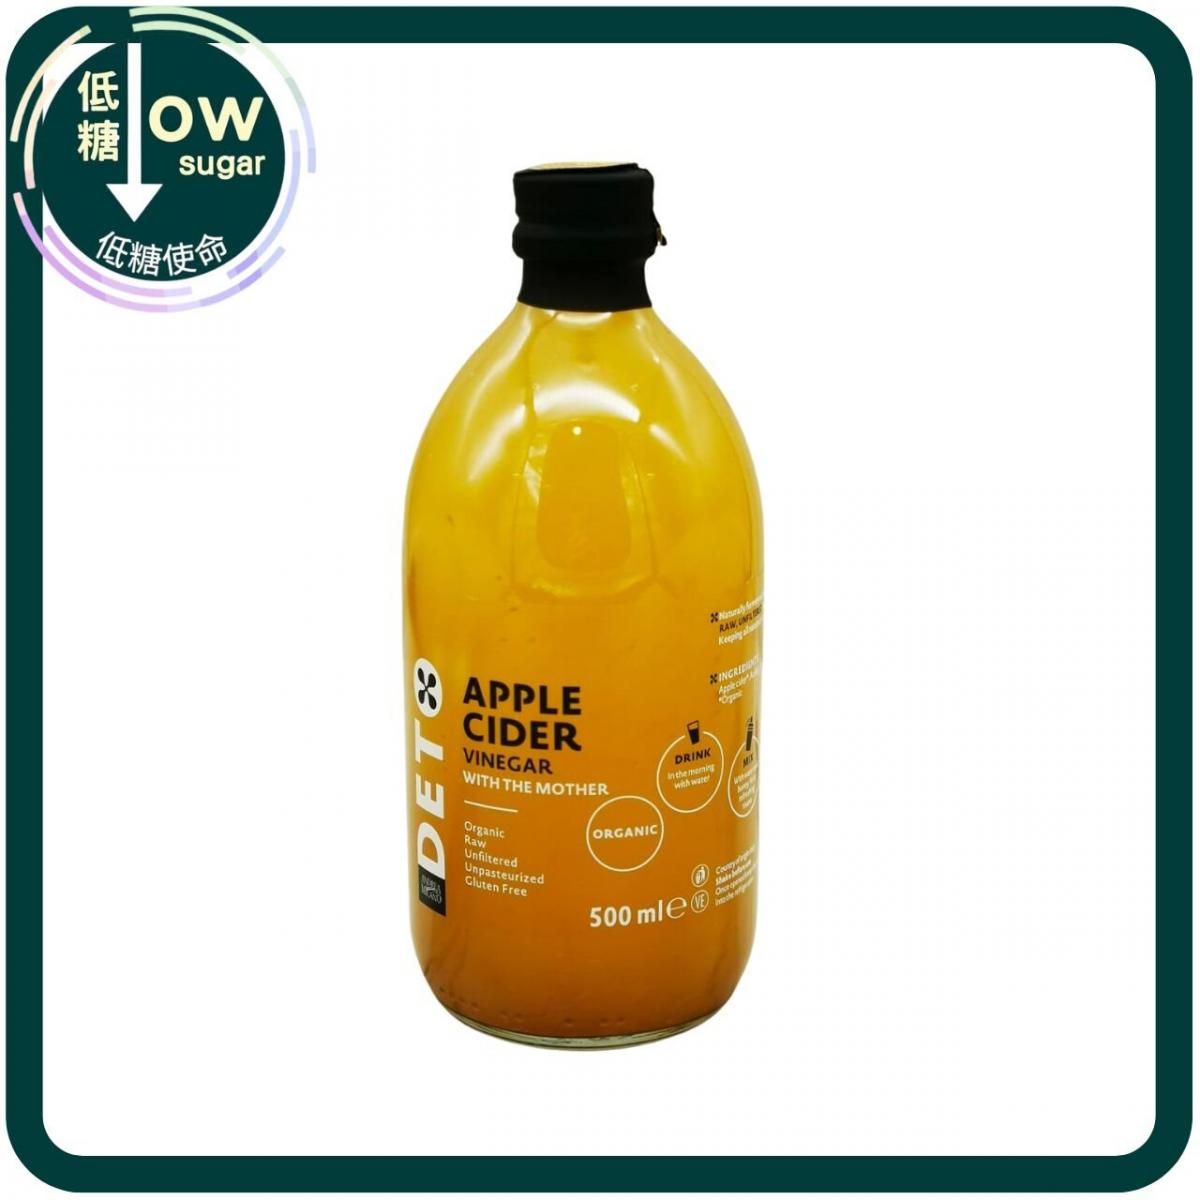 unfiltered organic apple cider vinegar with "Mother" 500ml